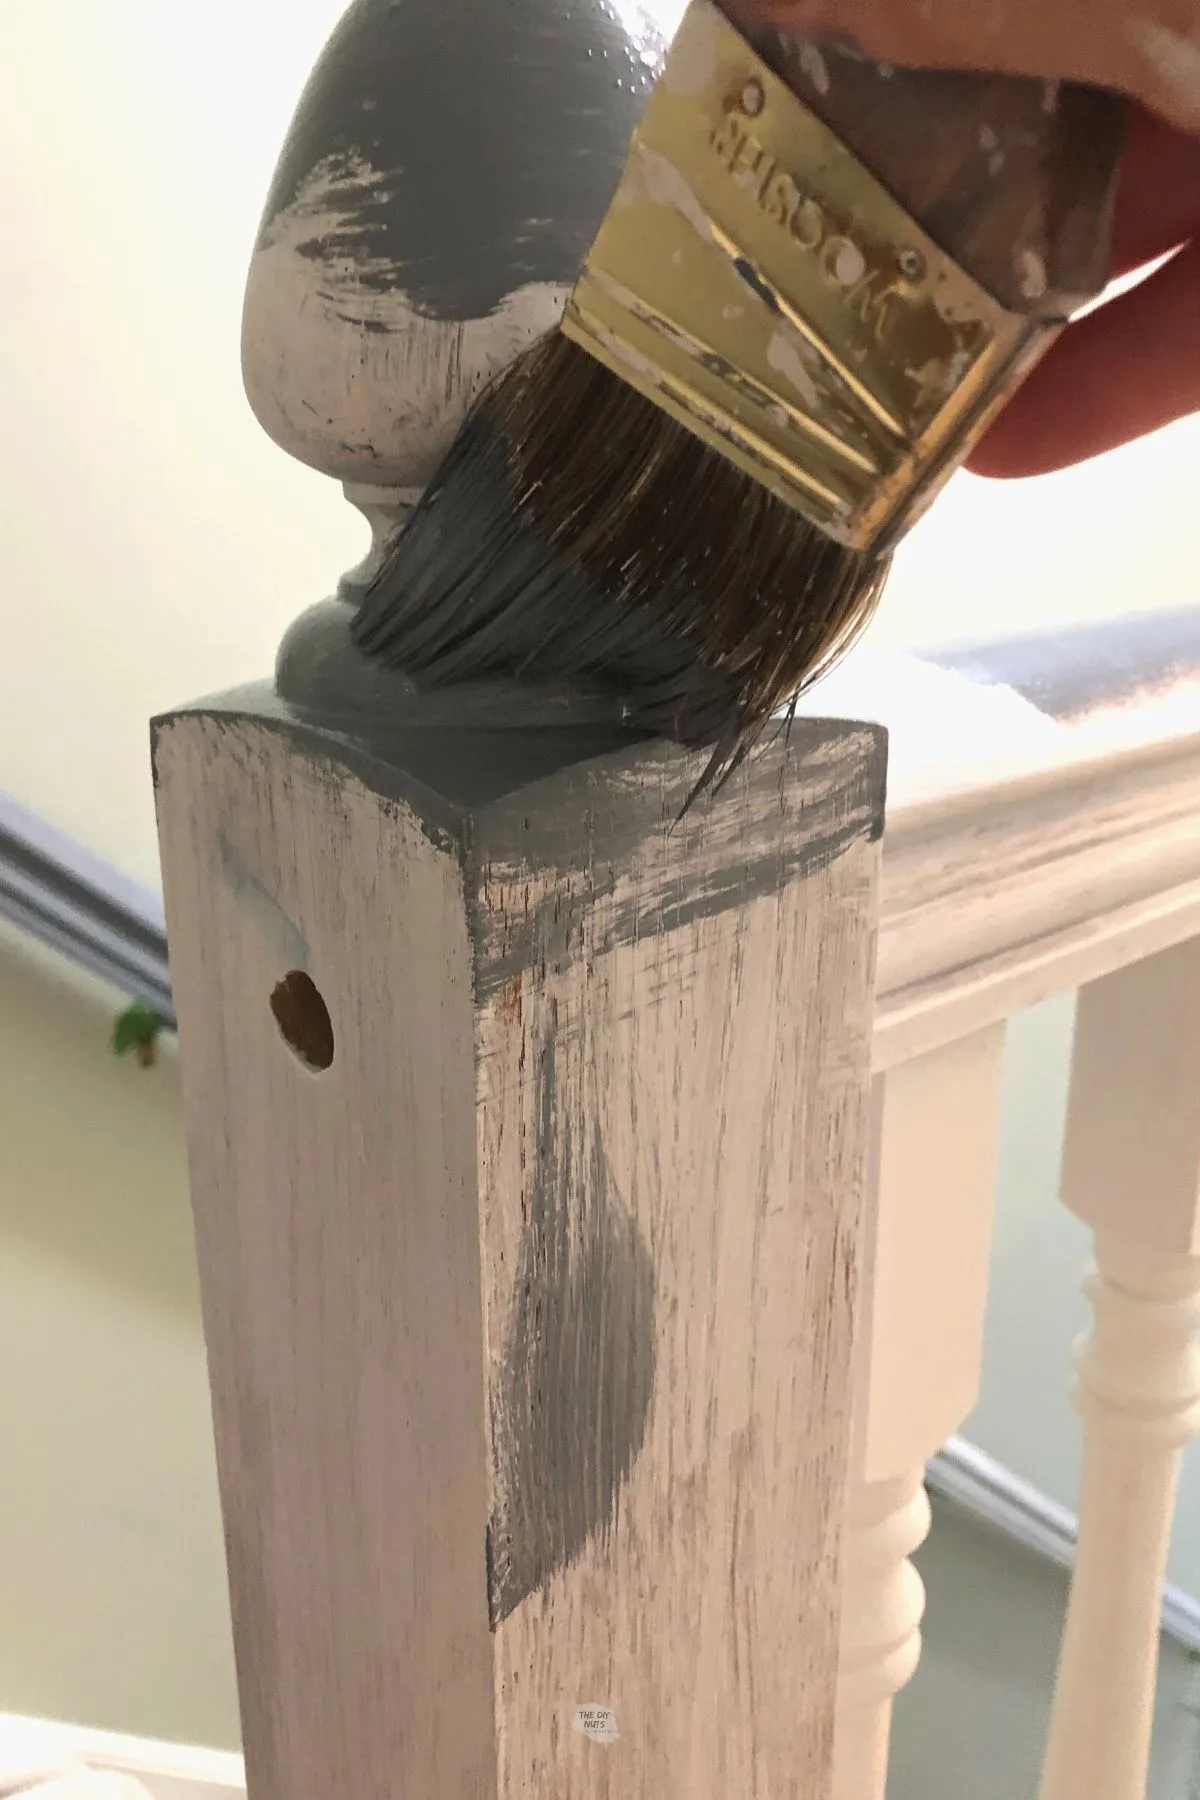 paint brush adding color to handrail.